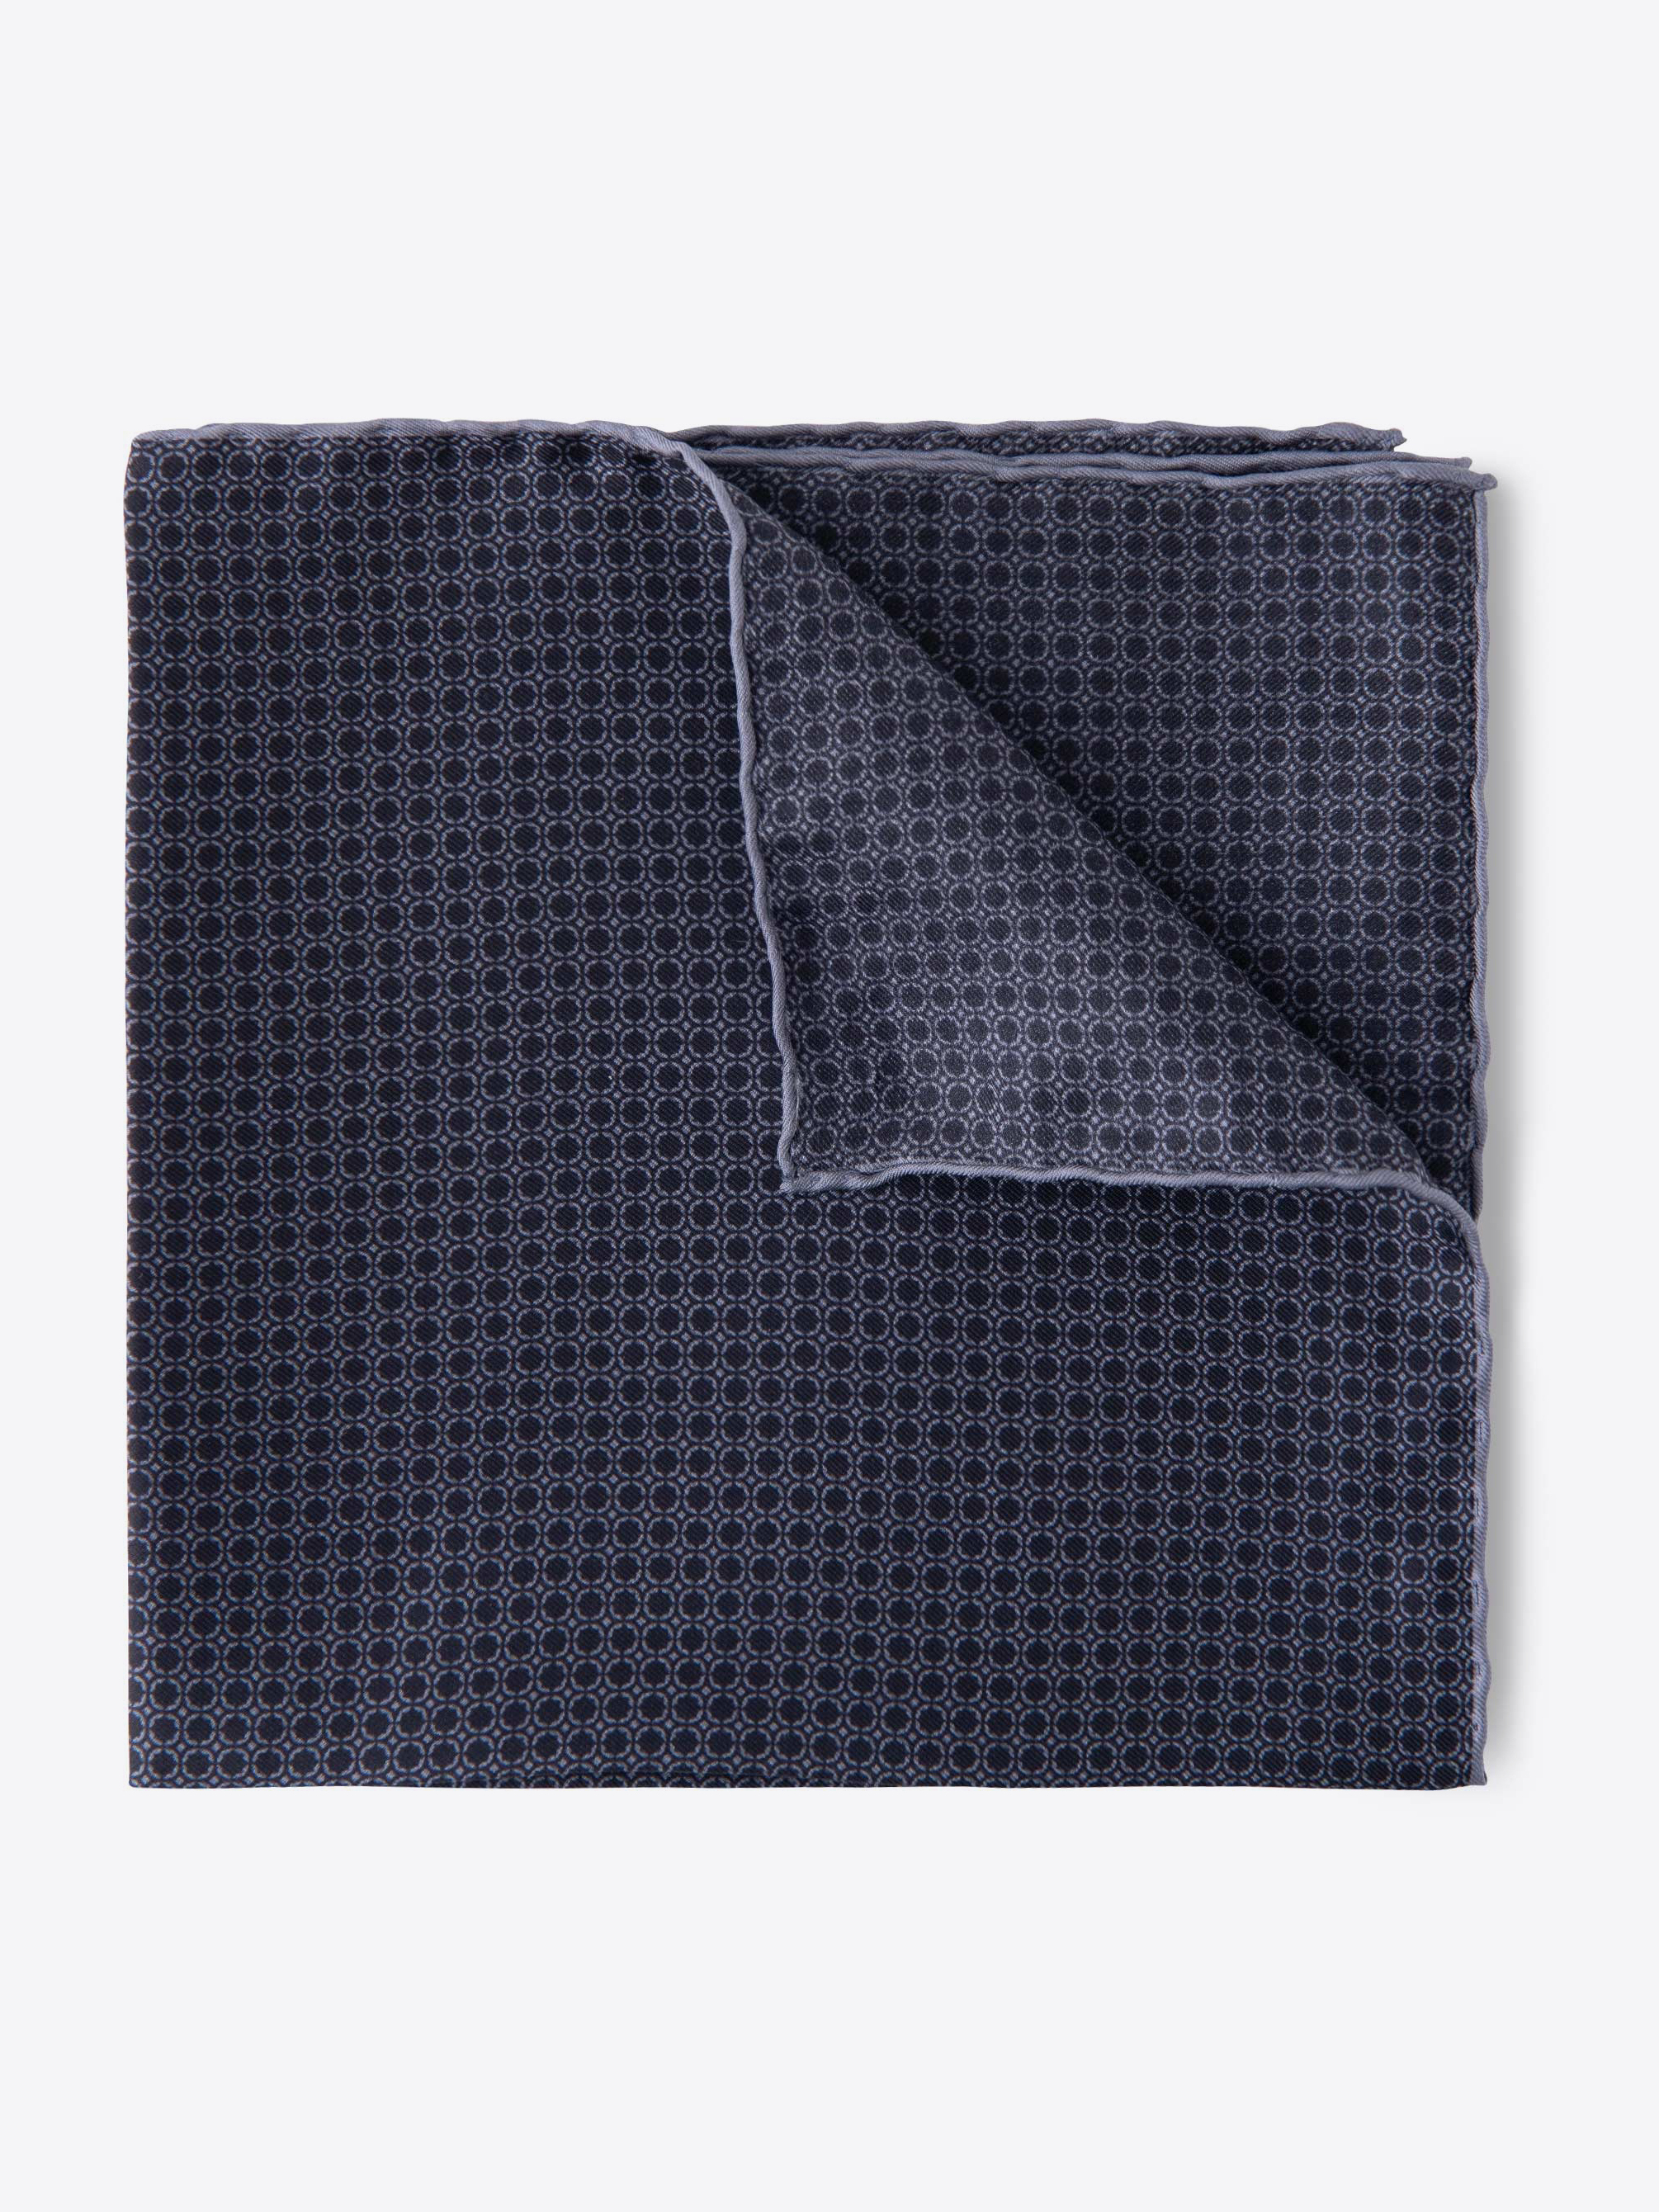 Zoom Image of Black and Grey Silk Pocket Square